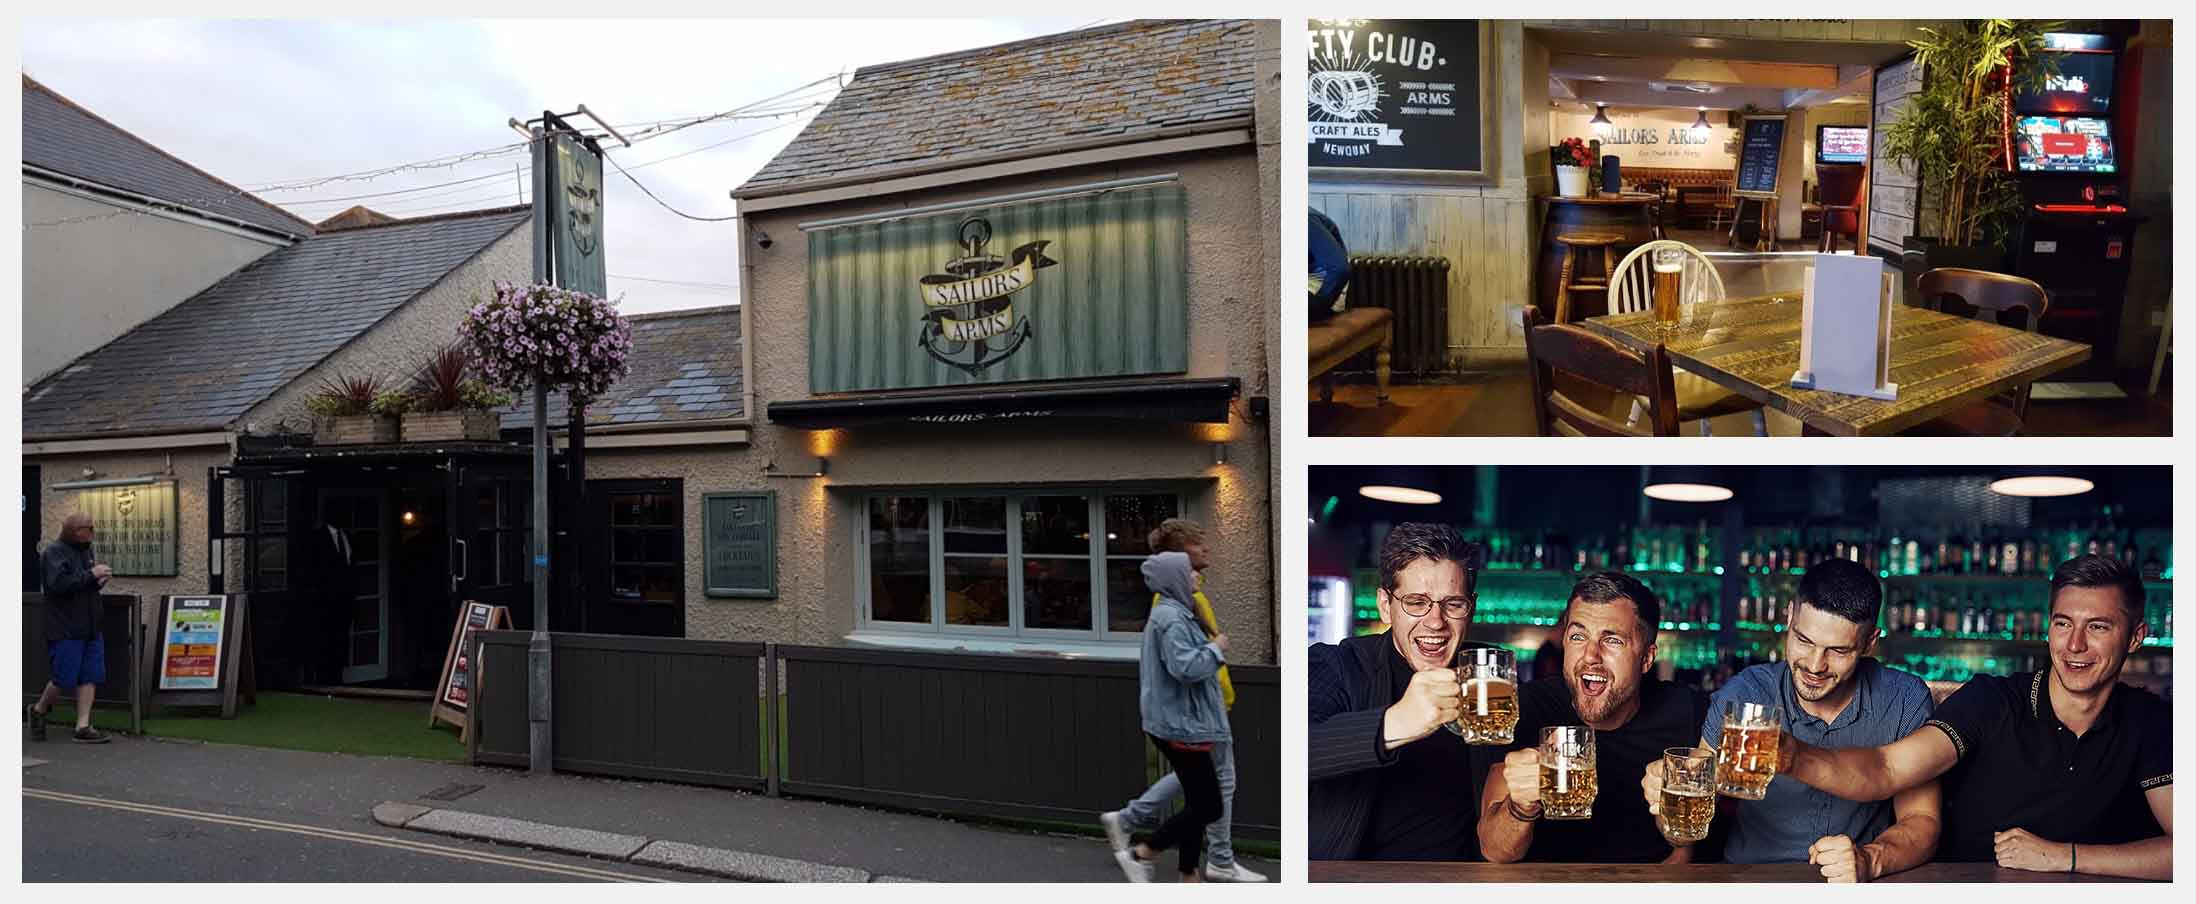 Best Sports Bars in Newquay - Sailors Arms